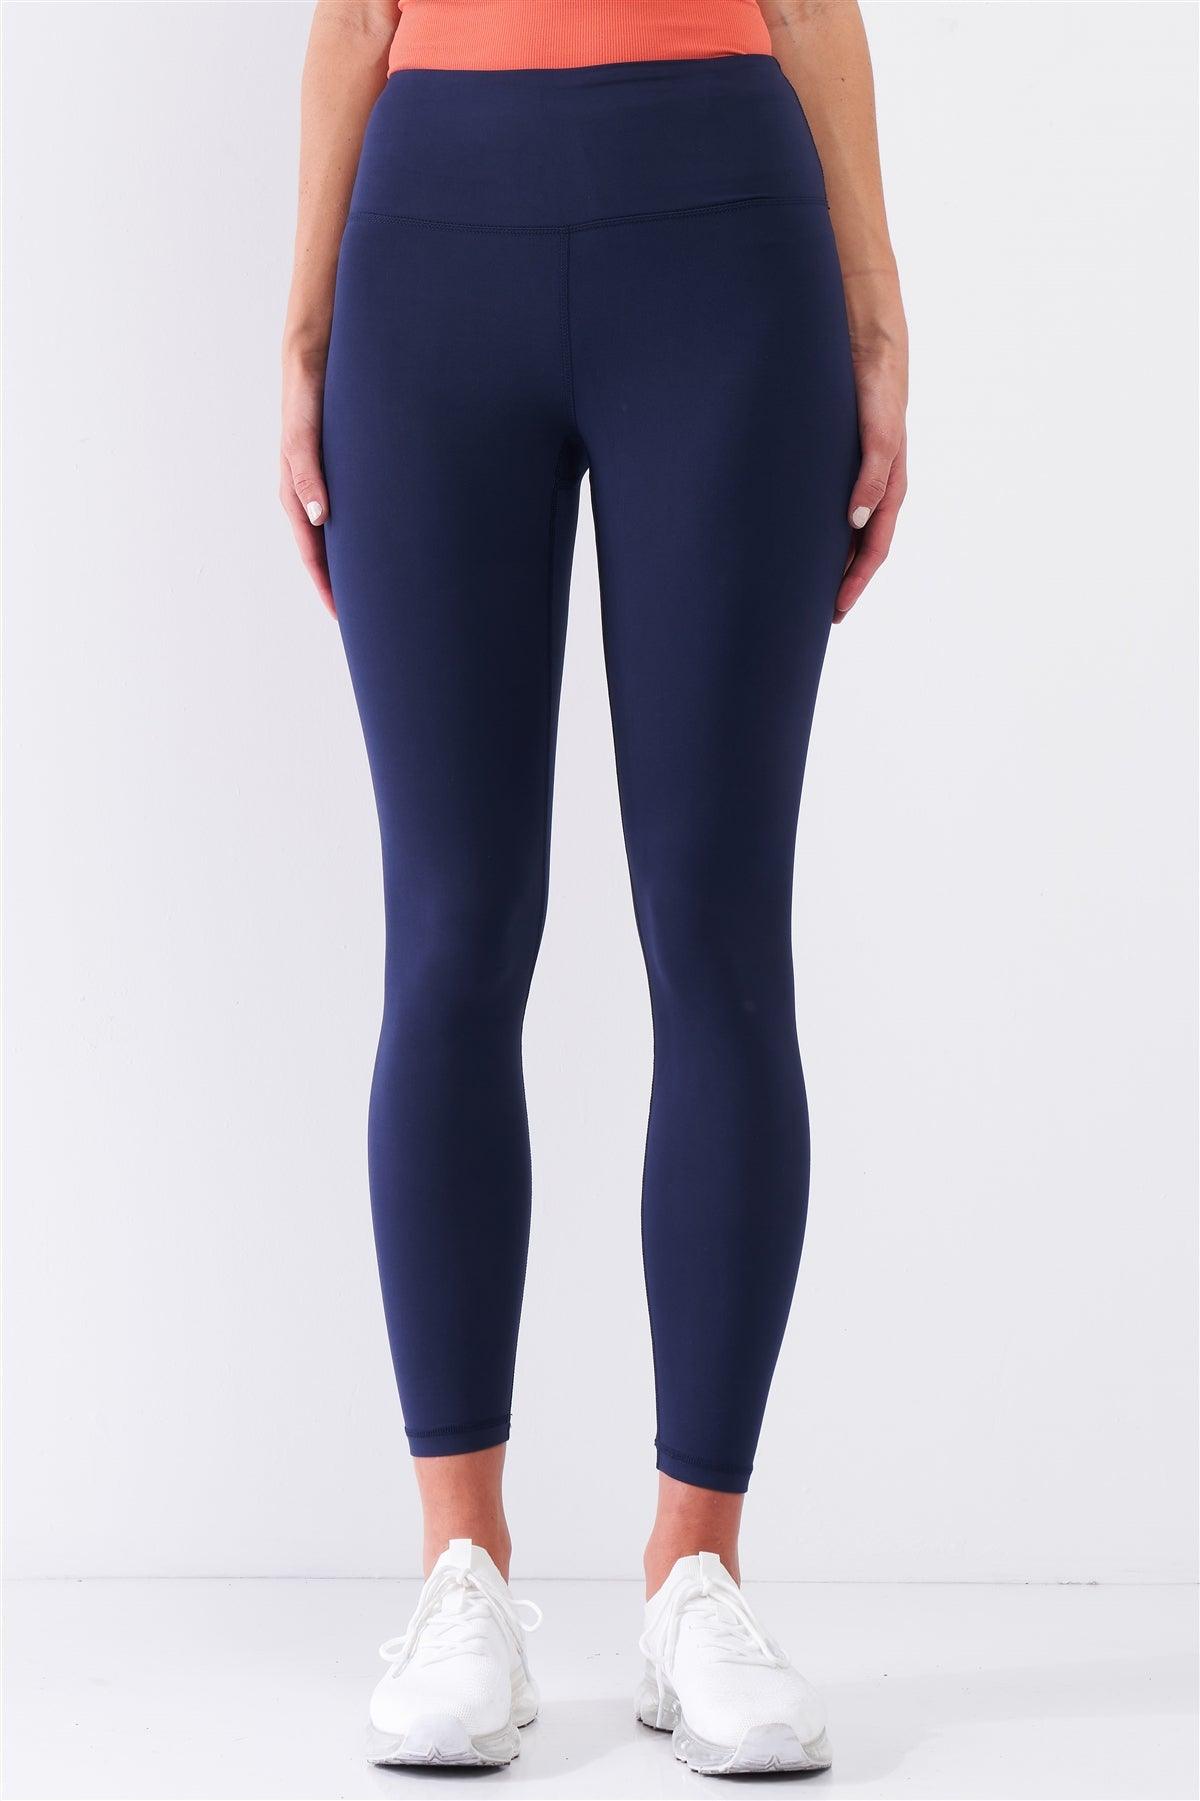 Navy Blue Mid-Rise Inner Waist Pocket Detail Tight Fit Soft Yoga & Work Out Legging Pants /1-2-2-1